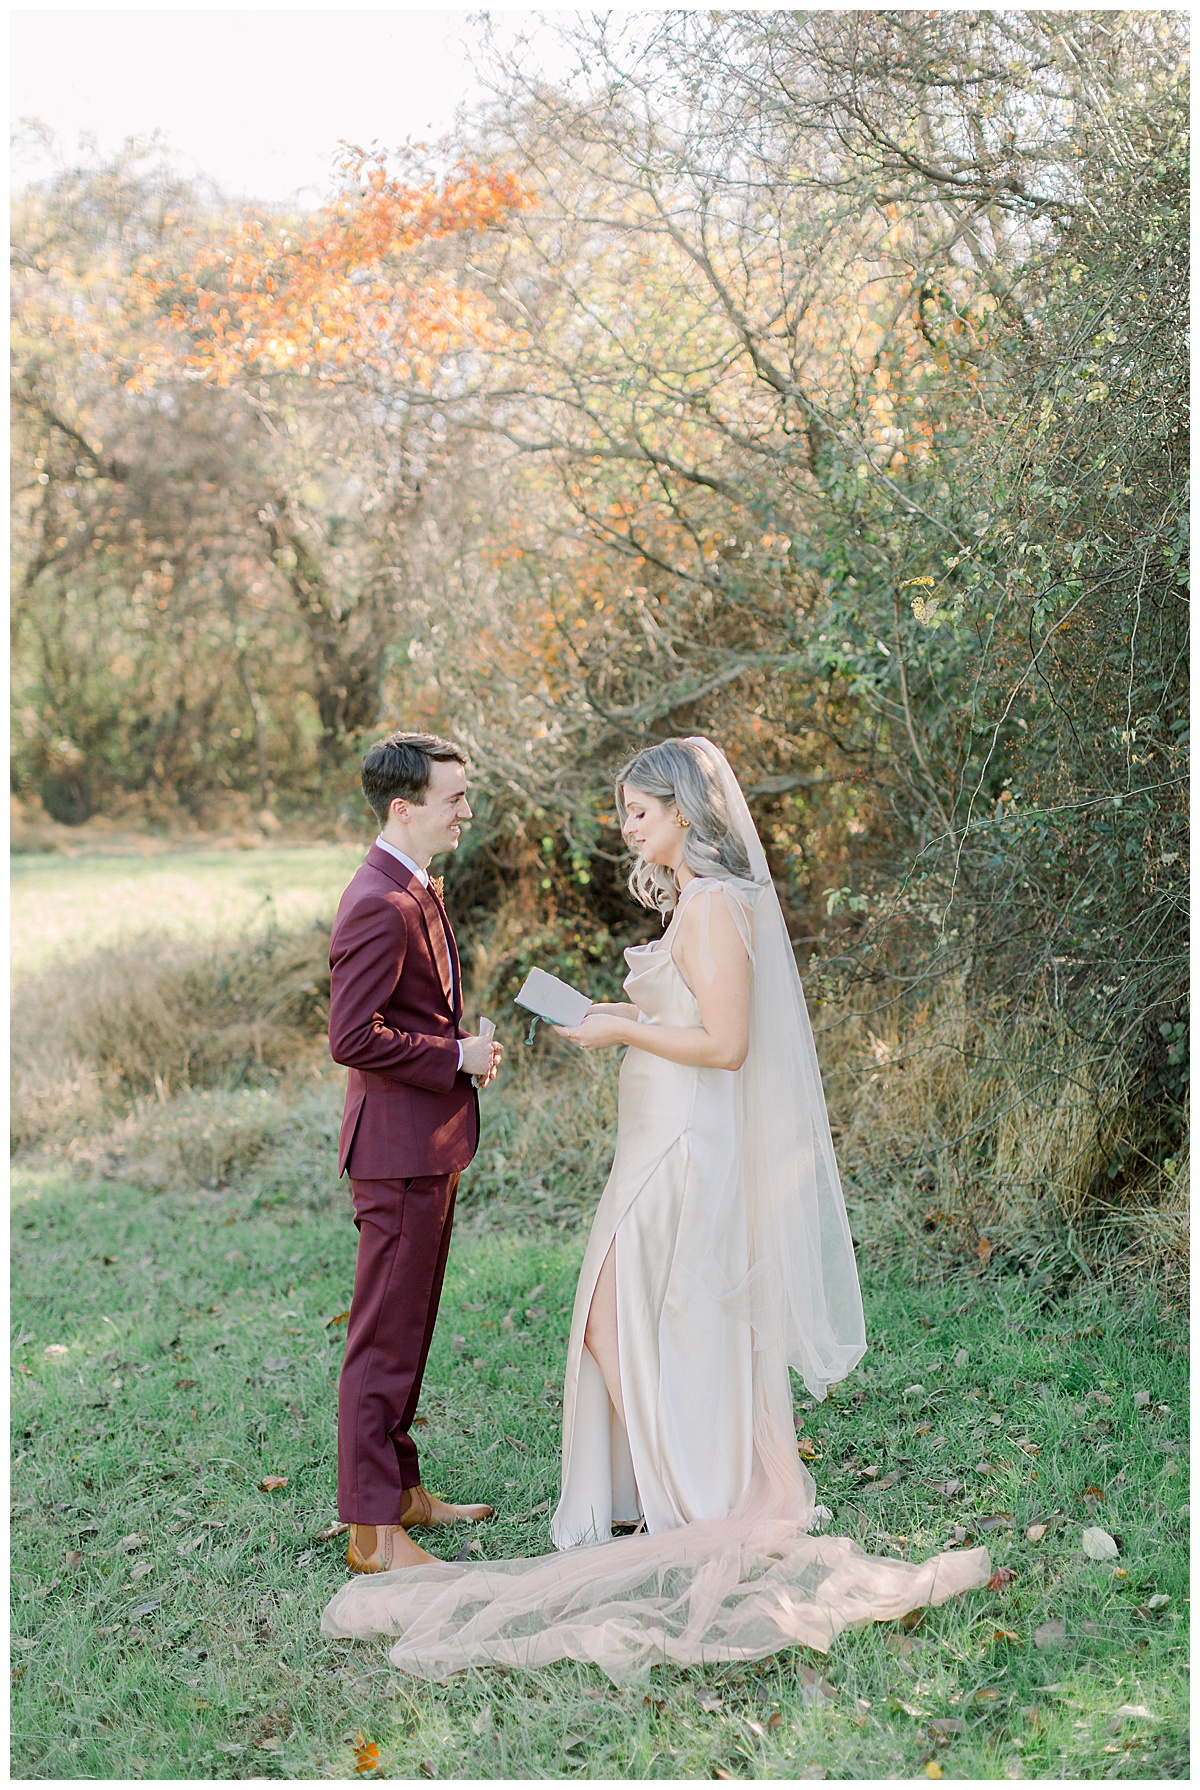 Margot and Johnny - A Charleston Covid Elopement | Candice Adelle Photography - Charleston Elopement Photographer_0057.jpg